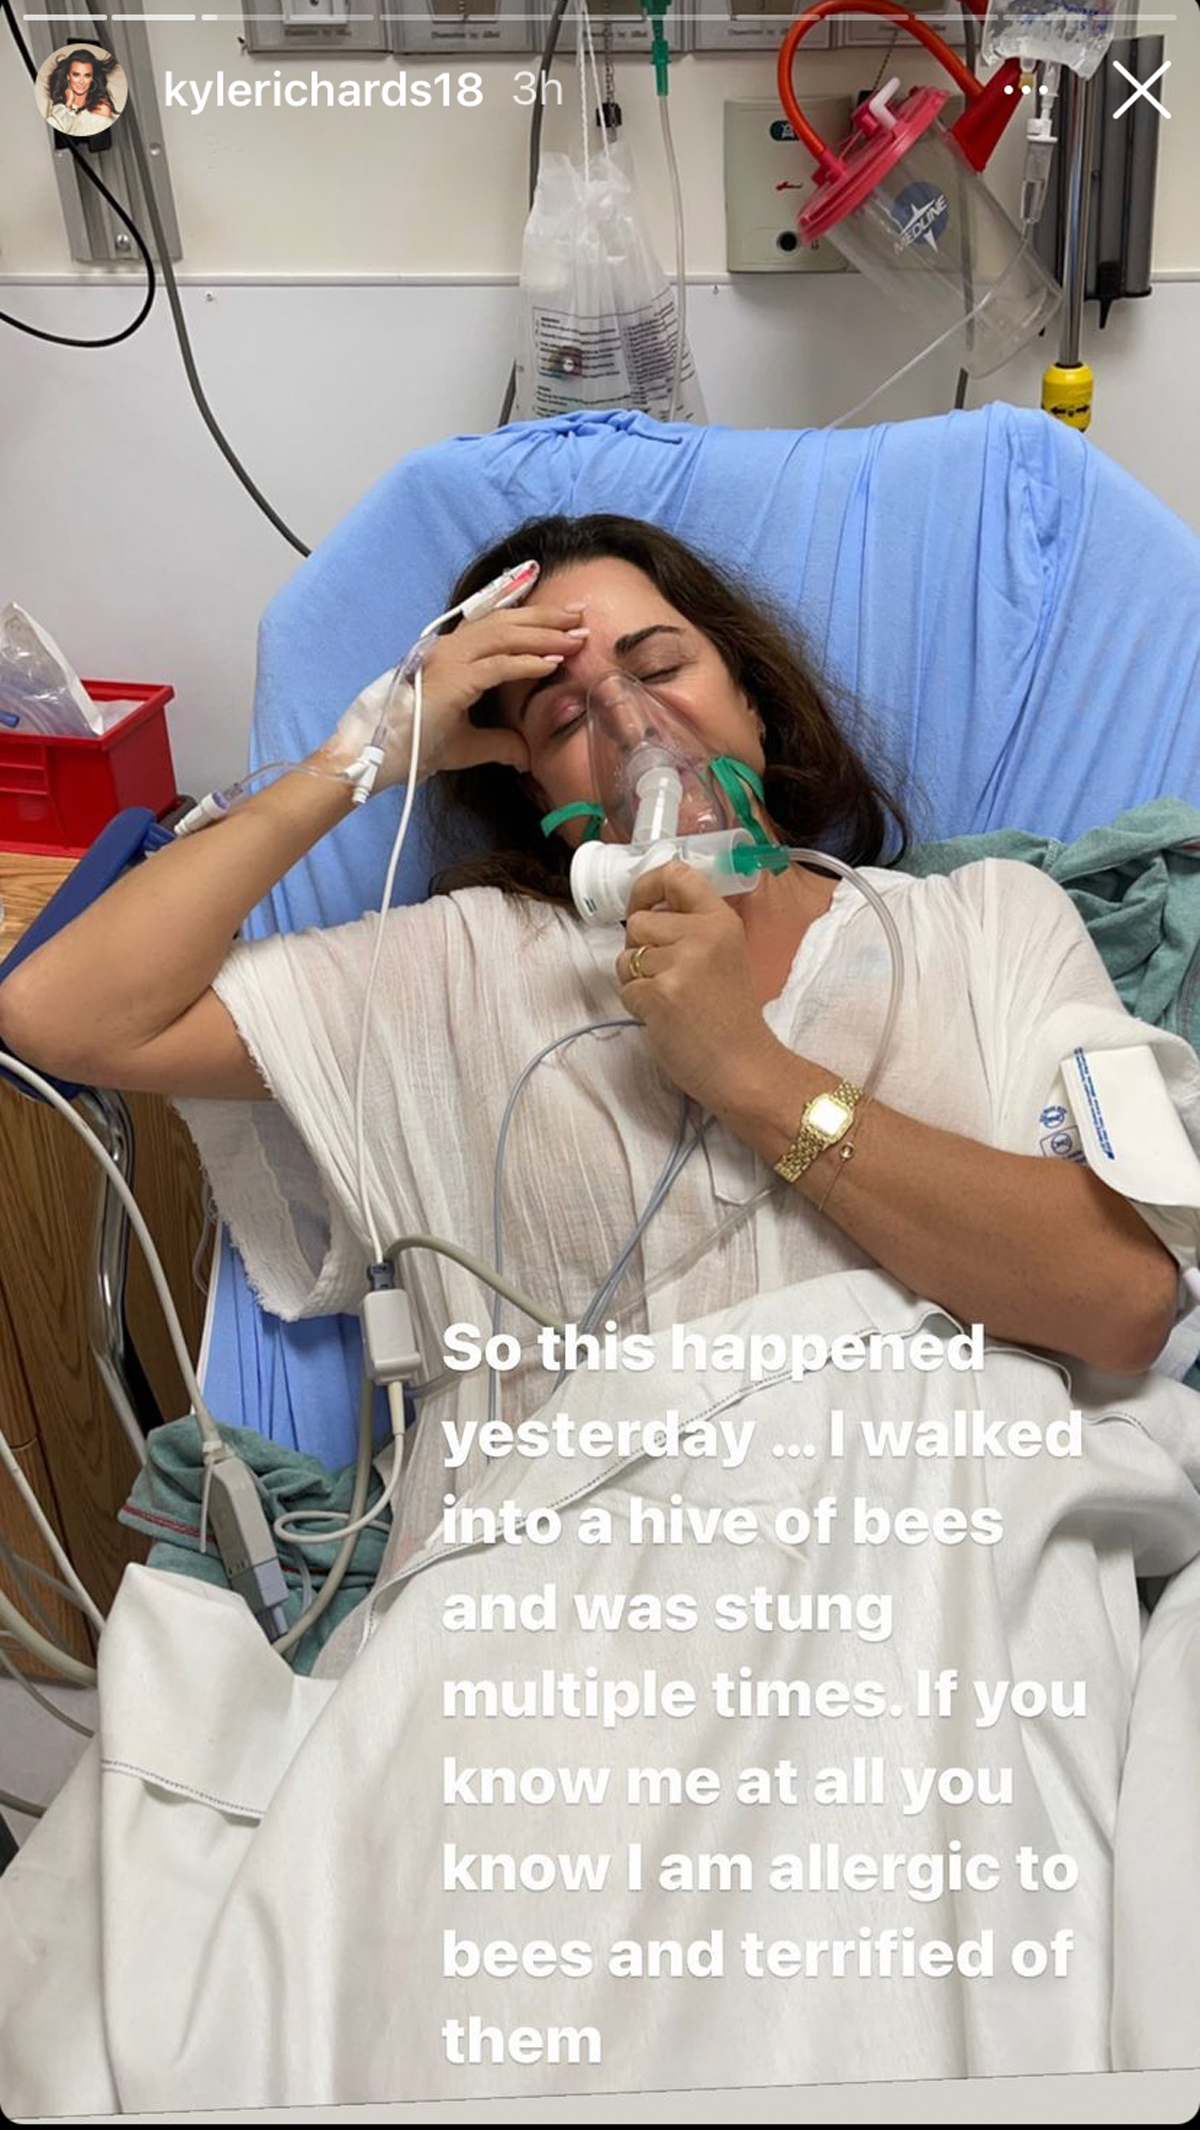 SO SCARY! RHOBH Super star Kyle Richards Hospitalized After For walks Into A Beehive! 